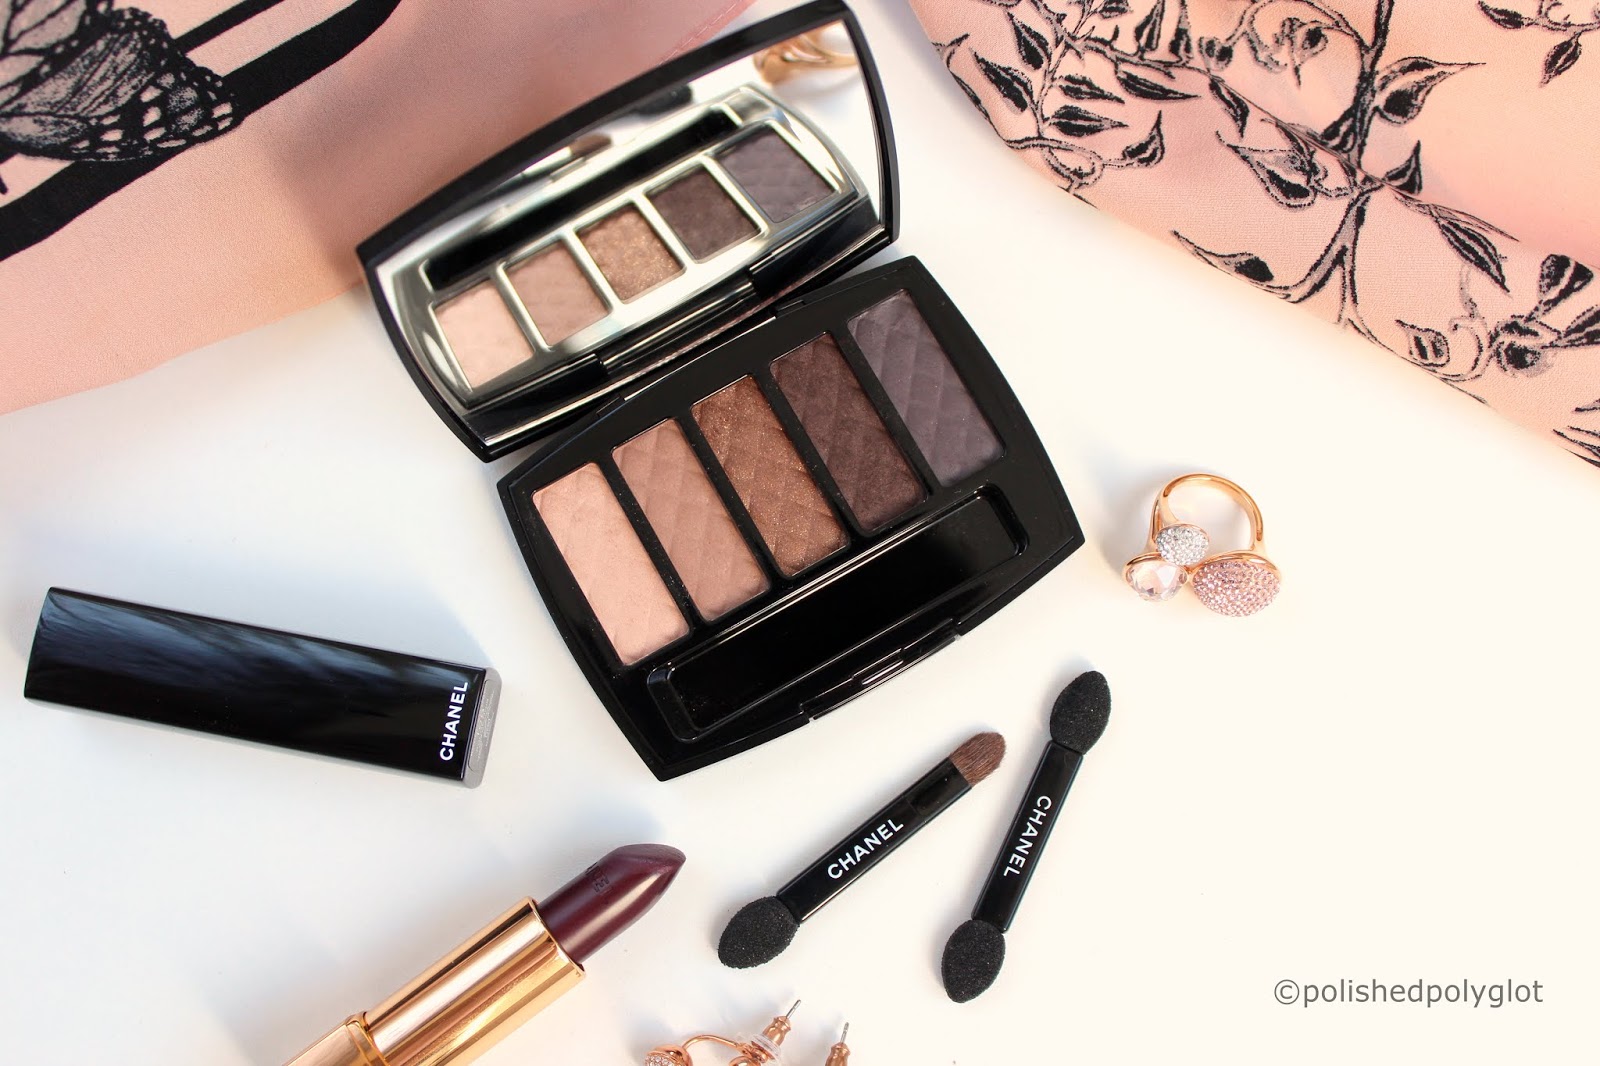 Chanel Tender Healthy Glow Eyeshadow Palette Review & Swatches